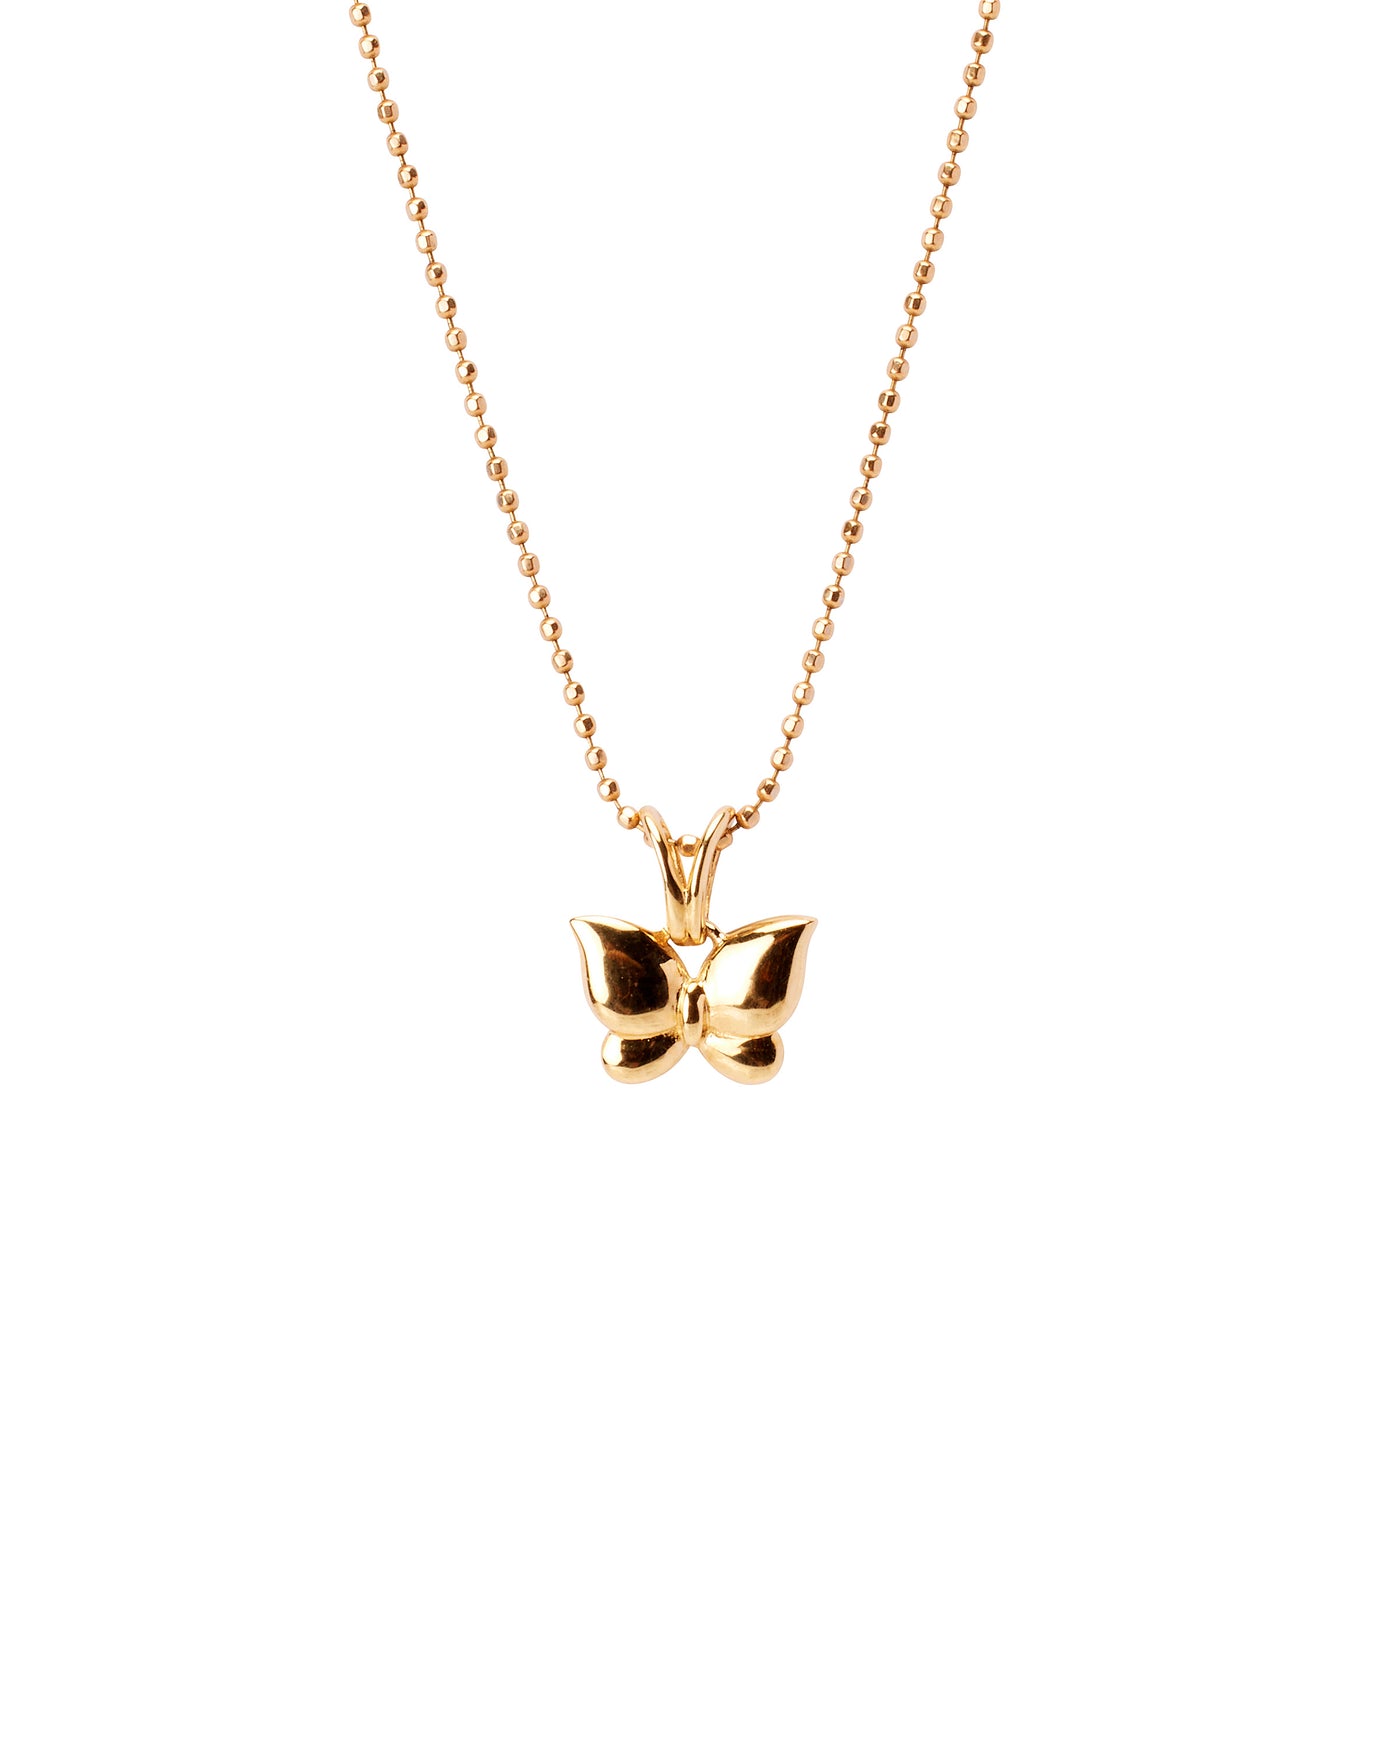 14k Yellow Gold Butterfly Pendant